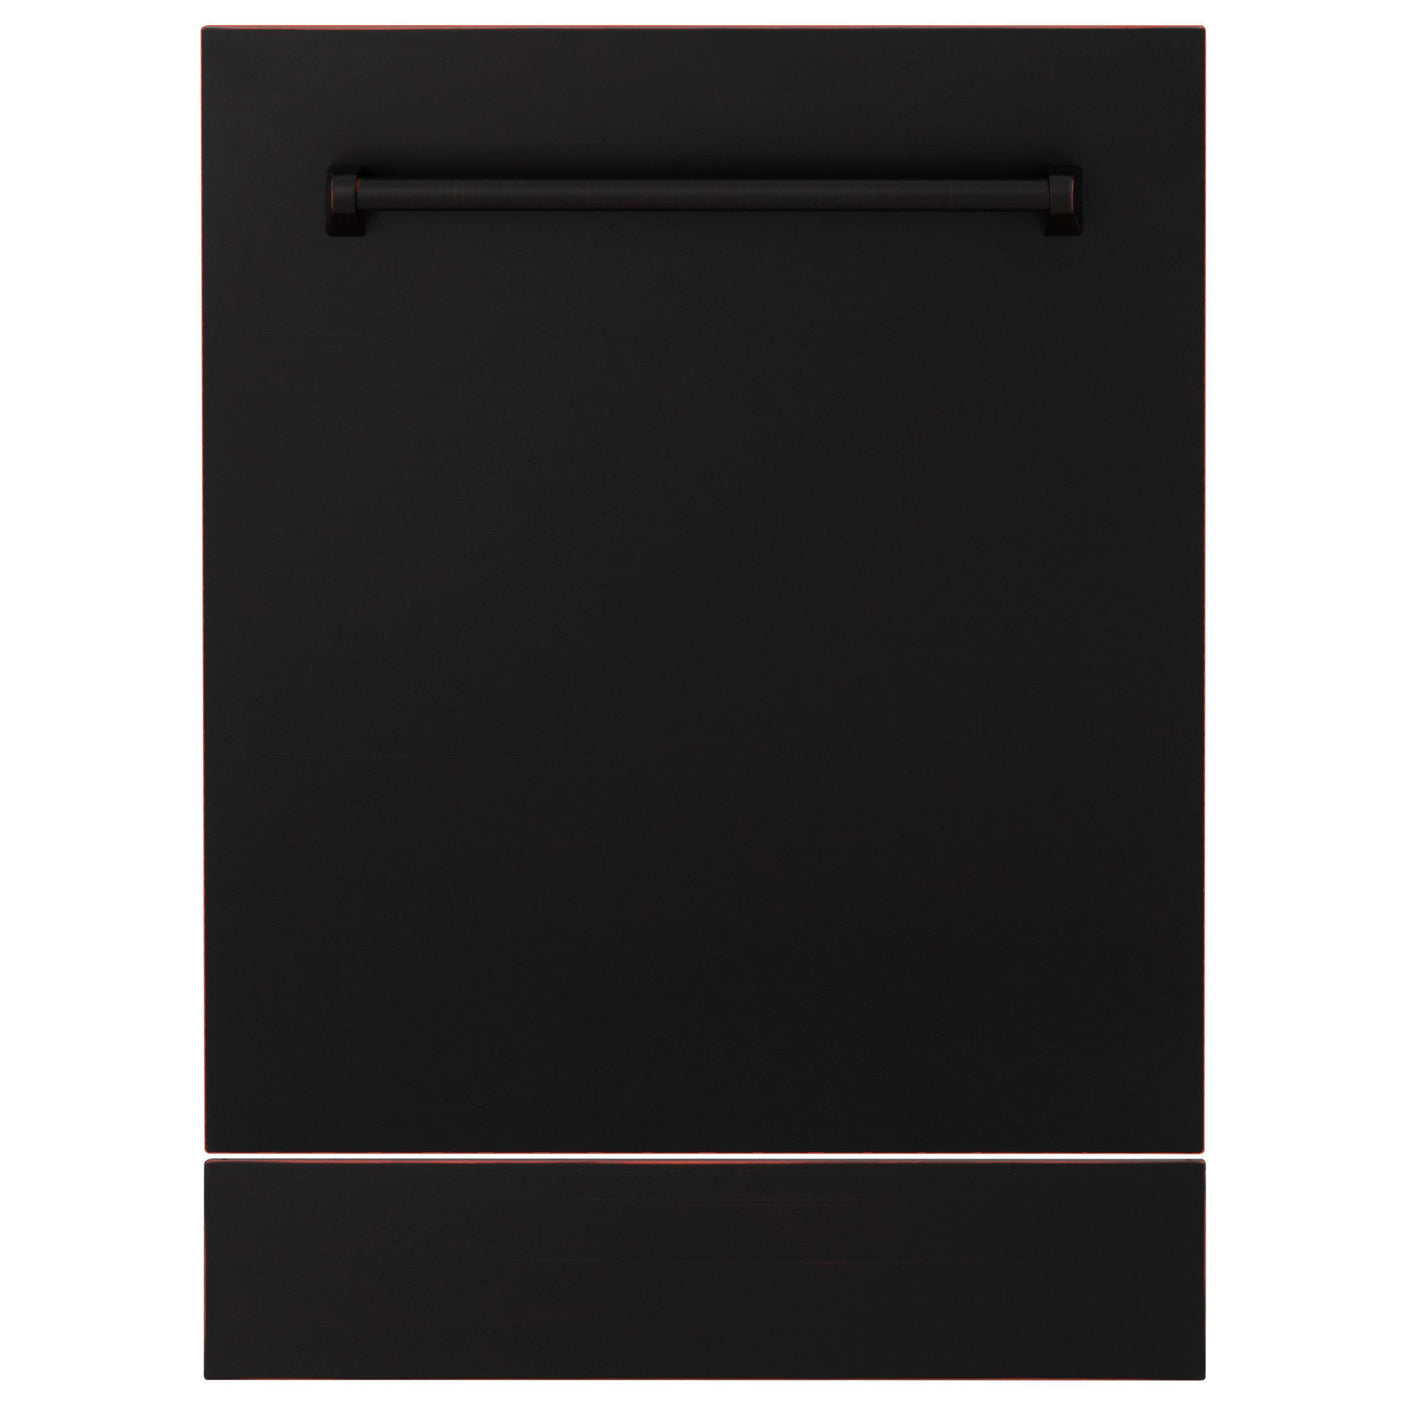 ZLINE 24" Tallac Series 3rd Rack Dishwasher with Traditional Handle, 51dBa (DWV-24) [Color: Oil Rubbed Bronze]